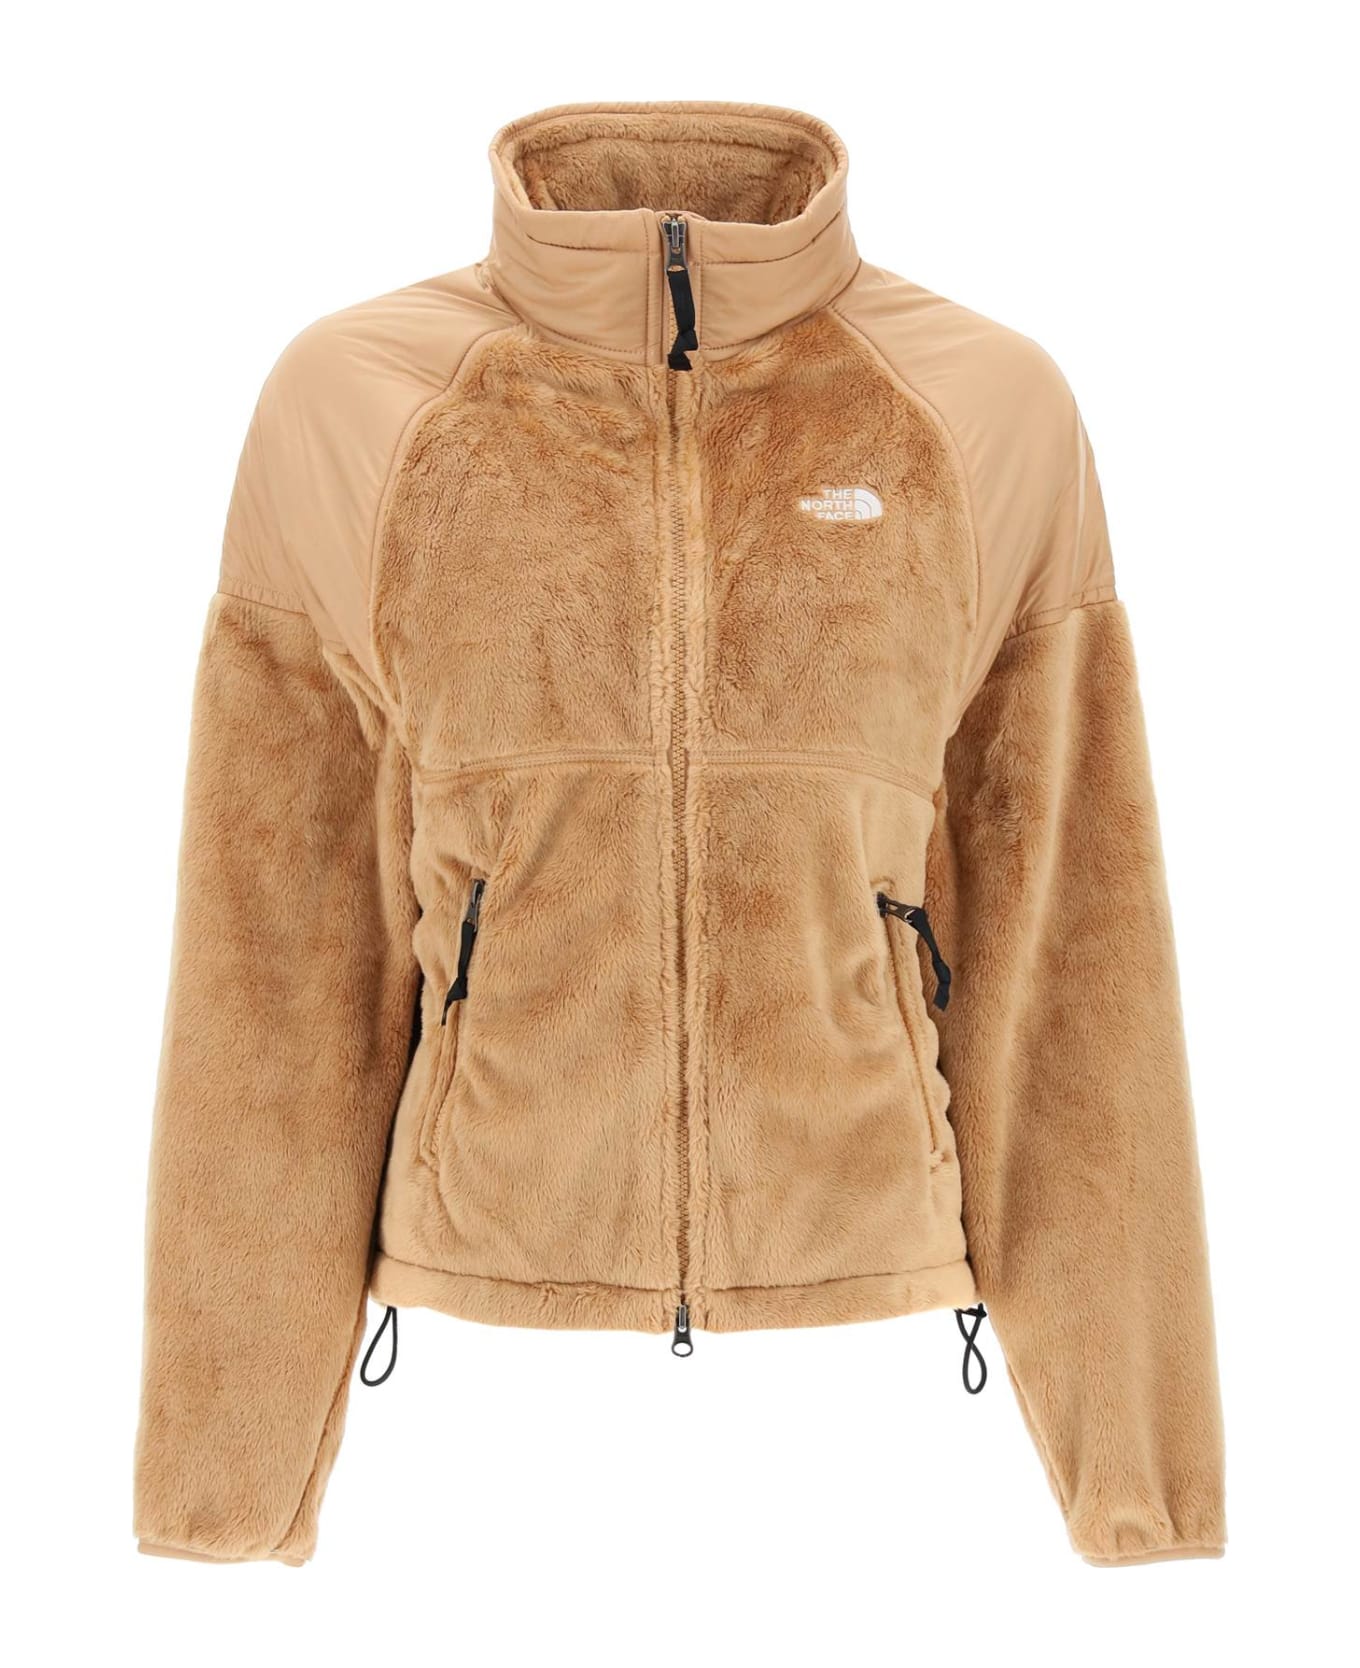 The North Face Versa Velour Jacket In Recycled Fleece And Ripstop - ALMOND BUTTER (Beige) ジャケット